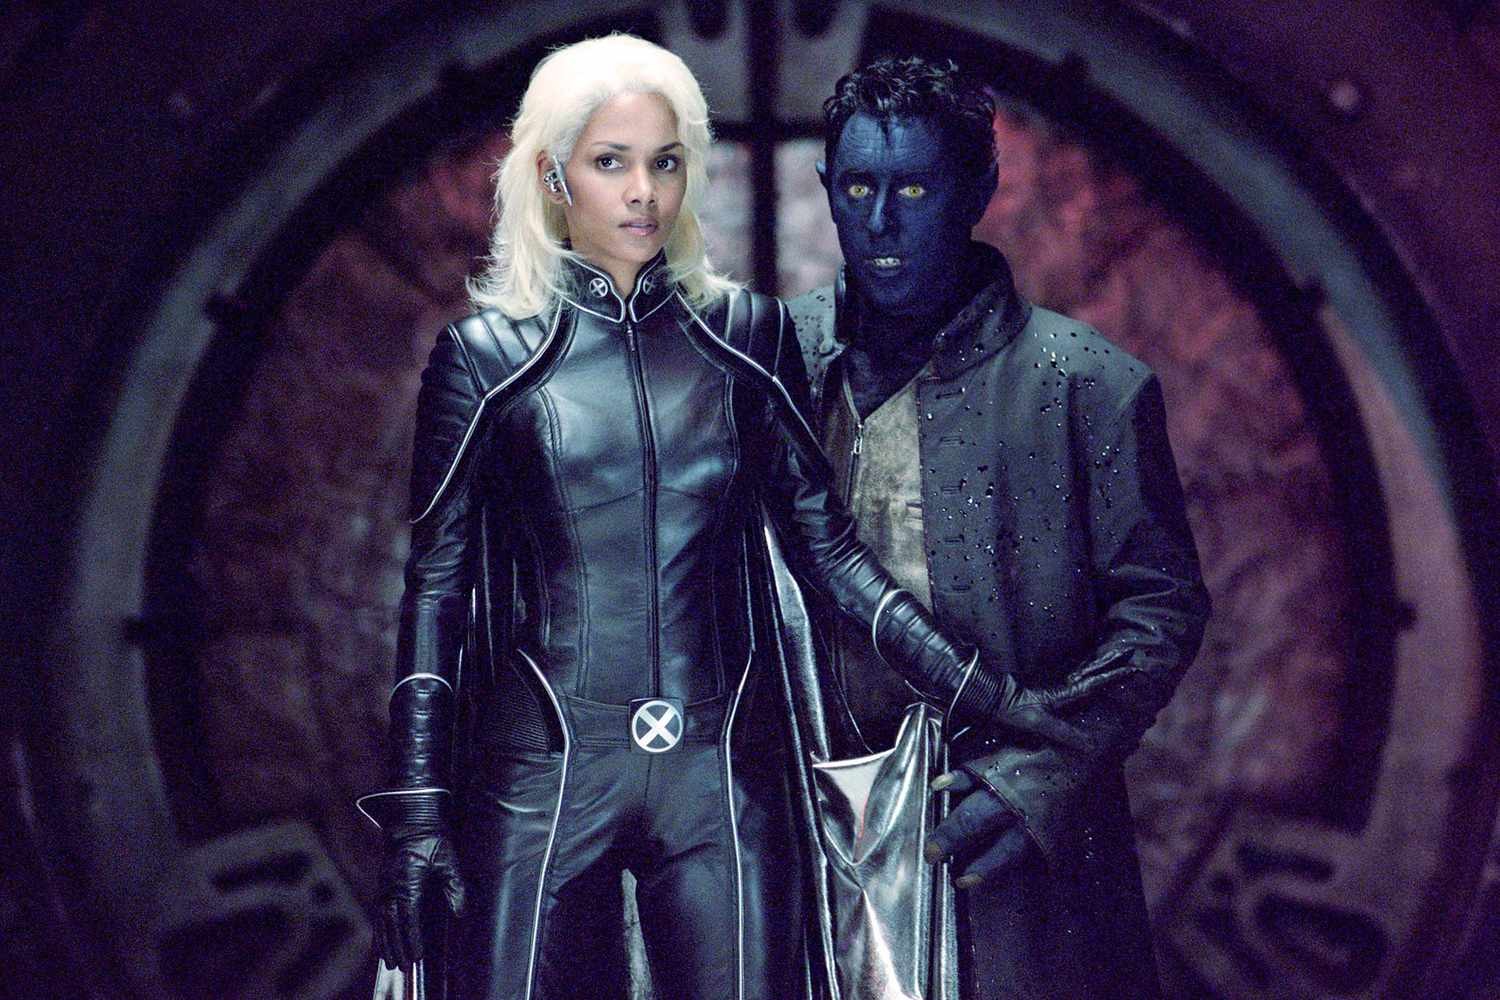 Halle Berry and Alan Cunning as Storm and Nightcrawler